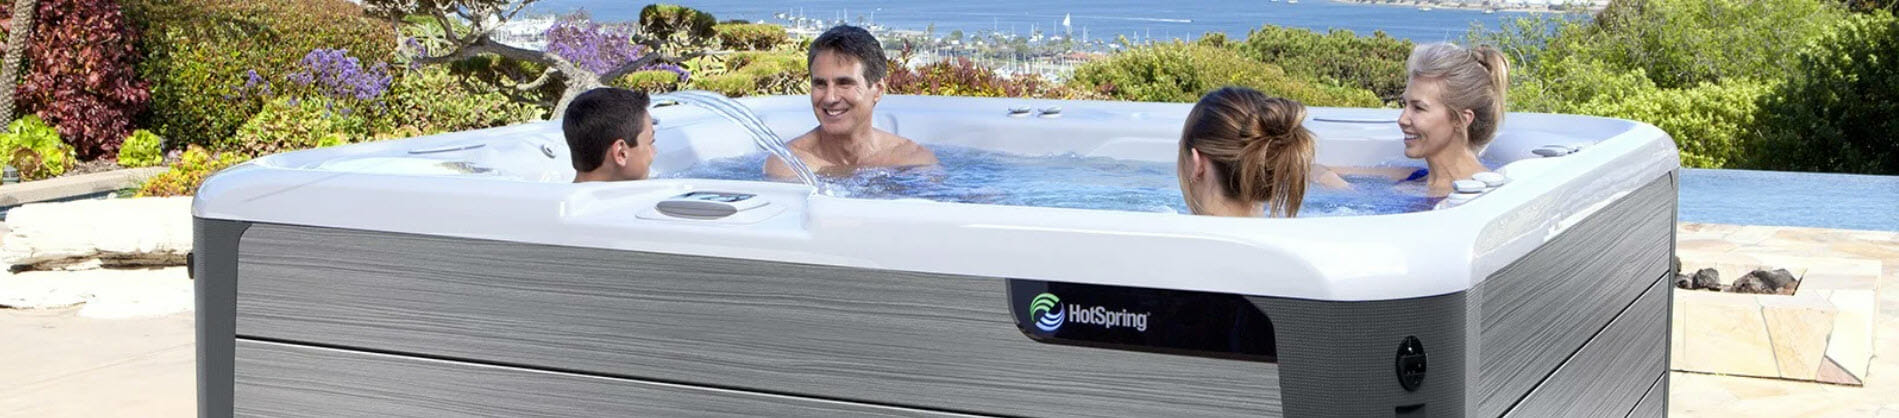 3 Ways to Benefit from Spa Ownership, Hot Tub Prices Milwaukee